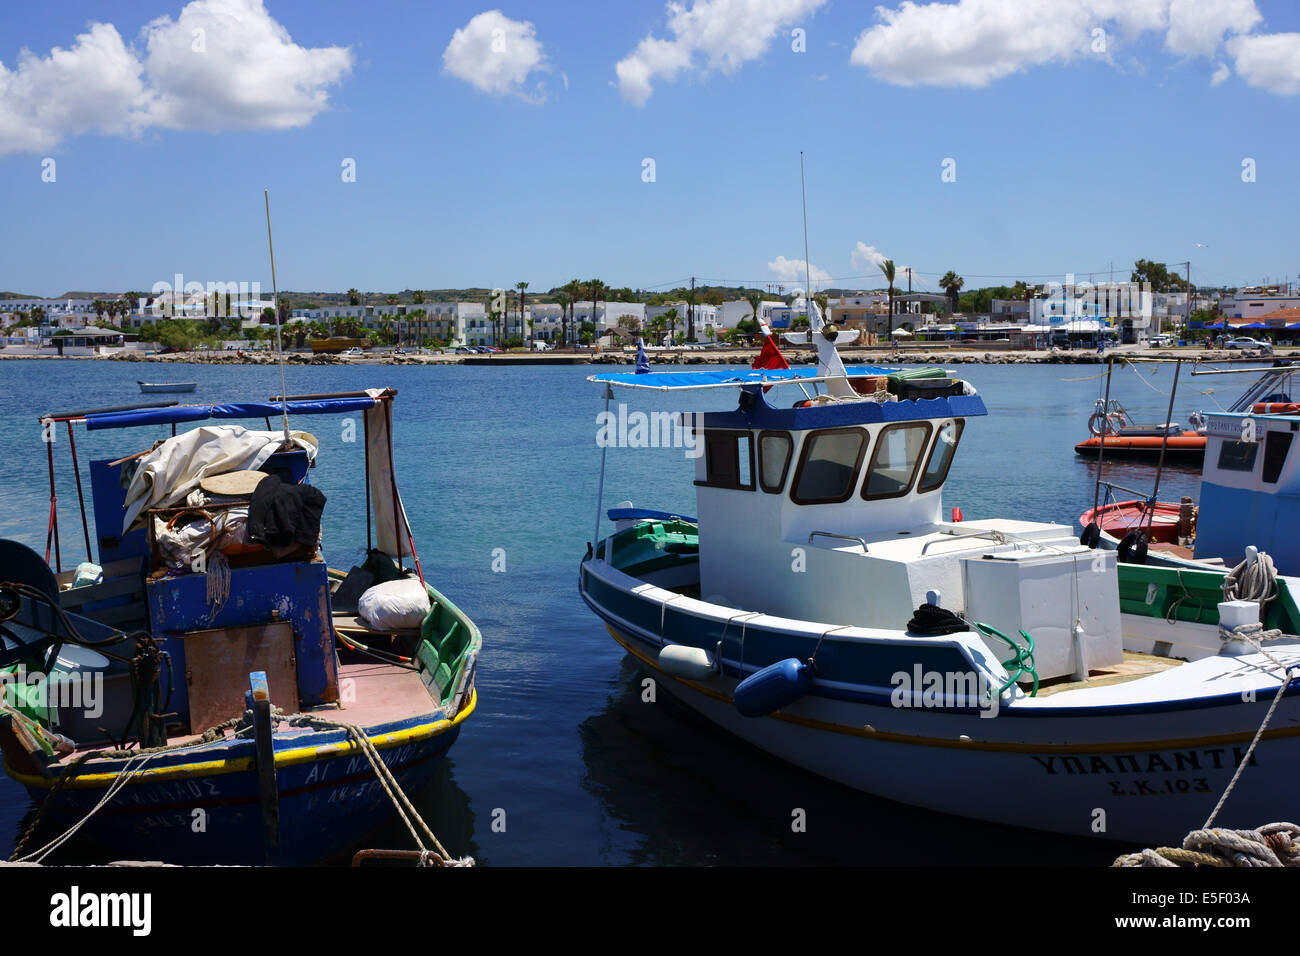 Town Mastichari seen from harbour with fishing boats, Island Kosw, Greece Stock Photo